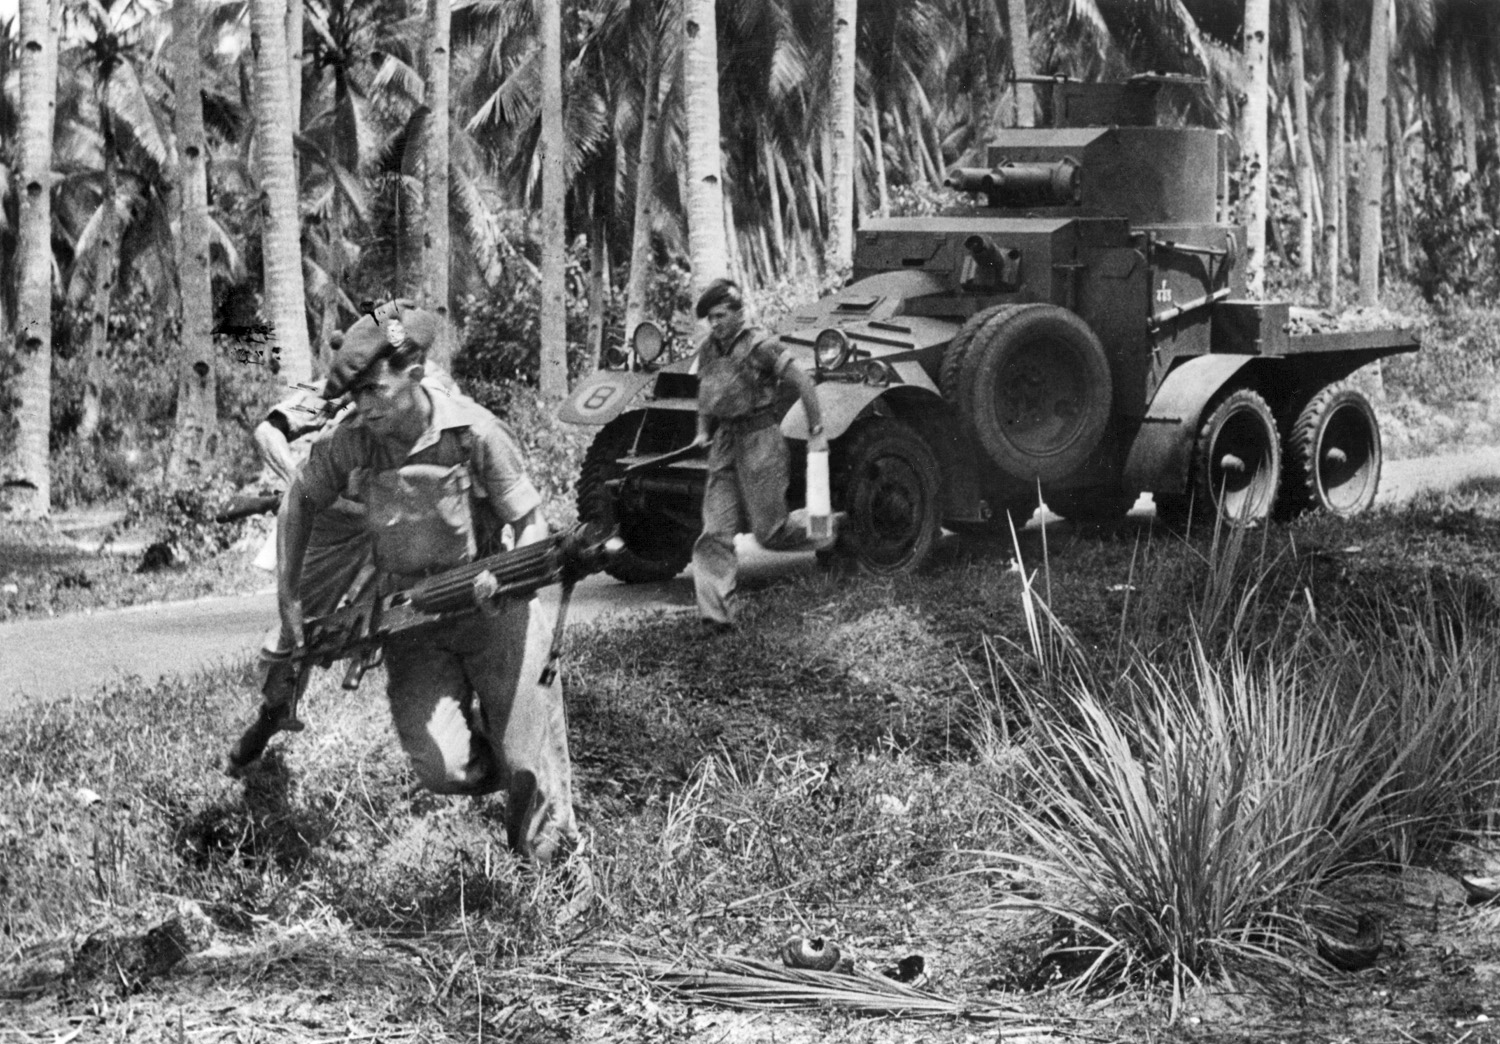 Members of the jungle-trained 2nd Battalion, Argyle and Sutherland Highlander Regiment, on maneuvers. The vehicle is a Lanchester 6x4 Mark I armored car. The soldier in the foreground carries a Vickers Mark VI machine gun.